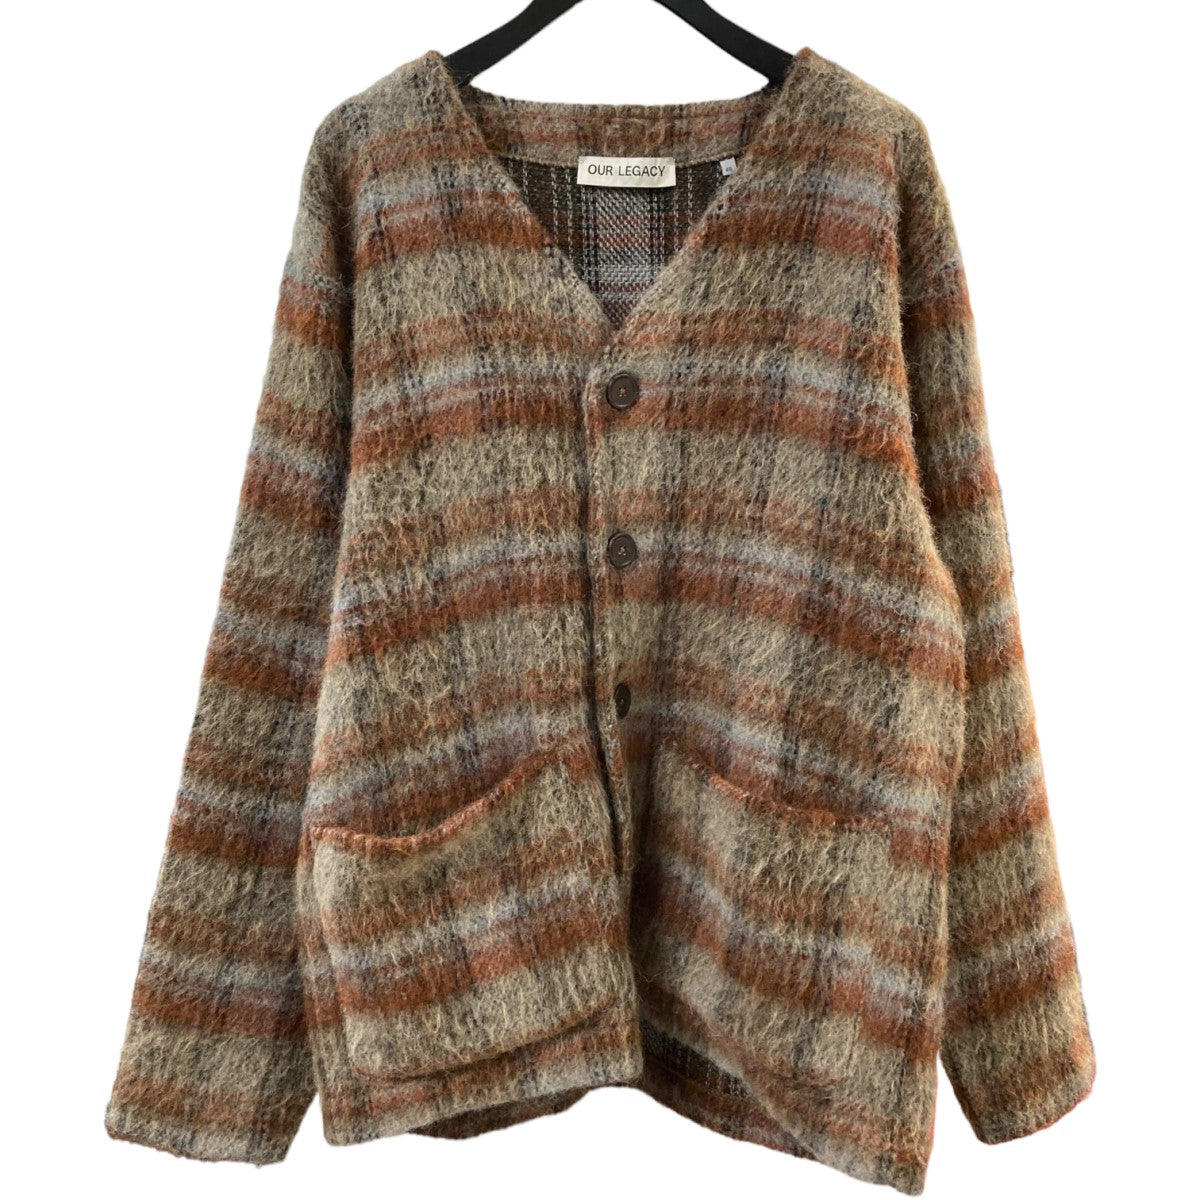 OUR LEGACY(アワーレガシー) 22AW「AMENT CHECK MOHAIR CARDIGAN 